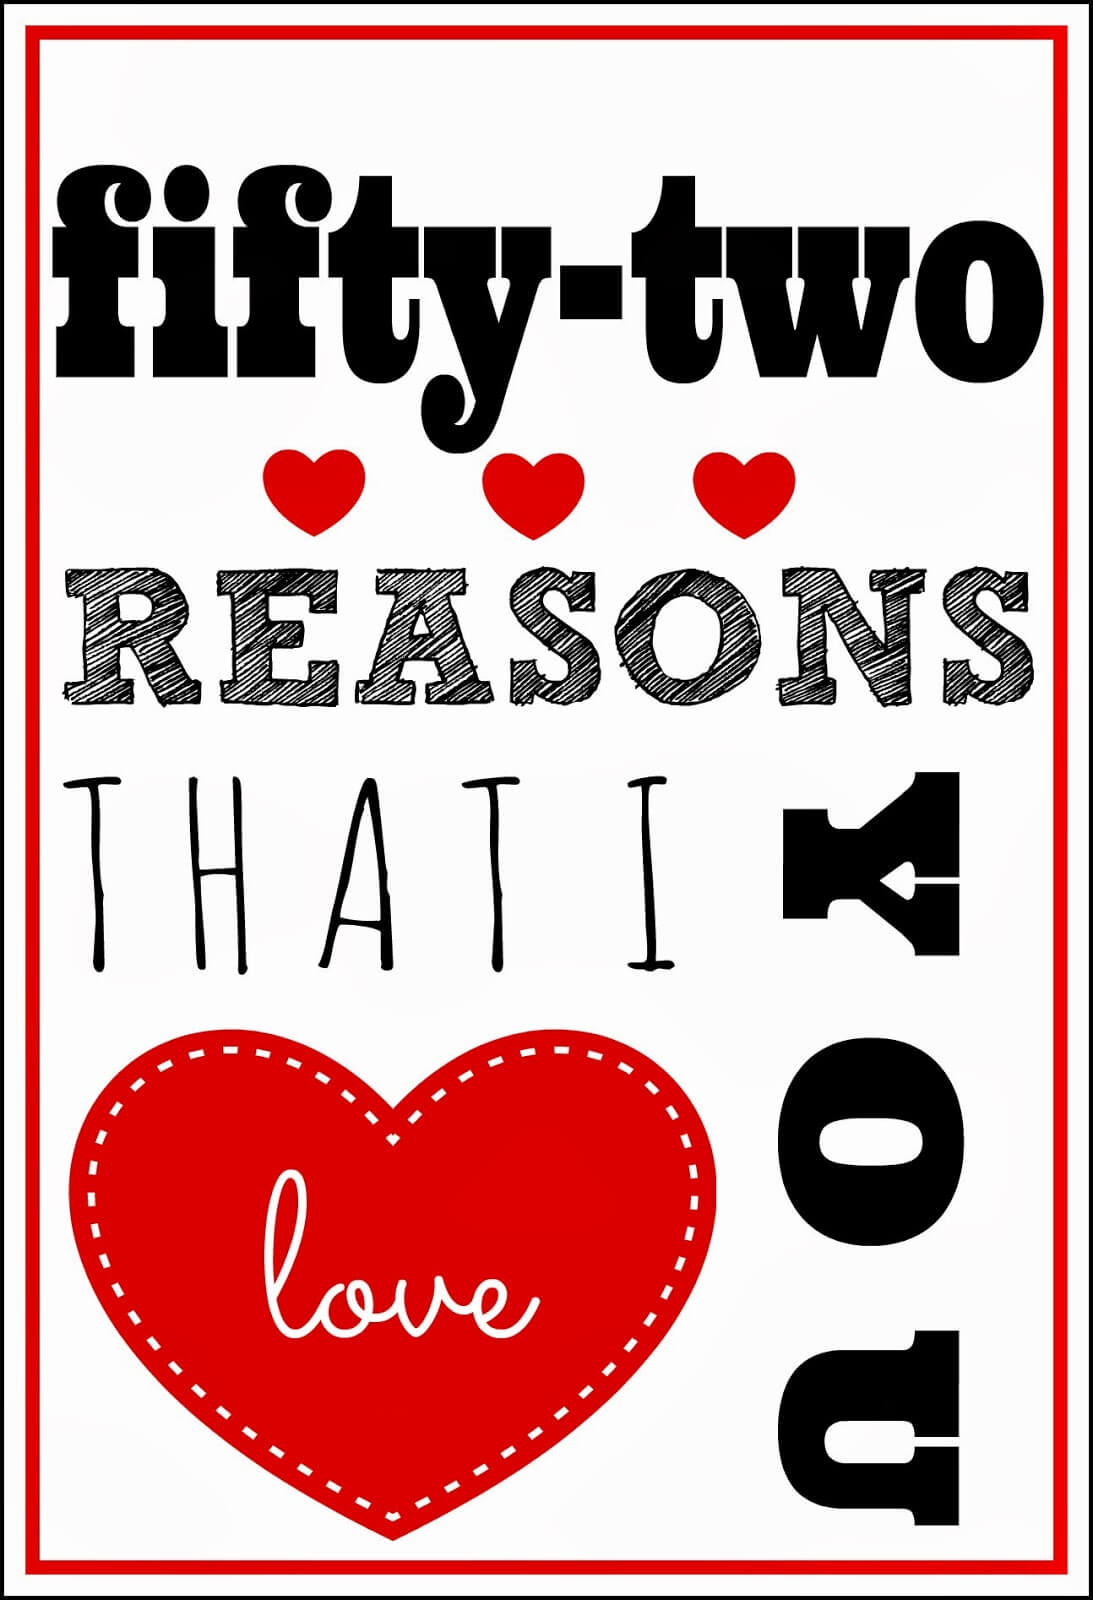 52 Reasons I Love You Template Free ] – 1000 Ideas About 52 Within 52 Reasons Why I Love You Cards Templates